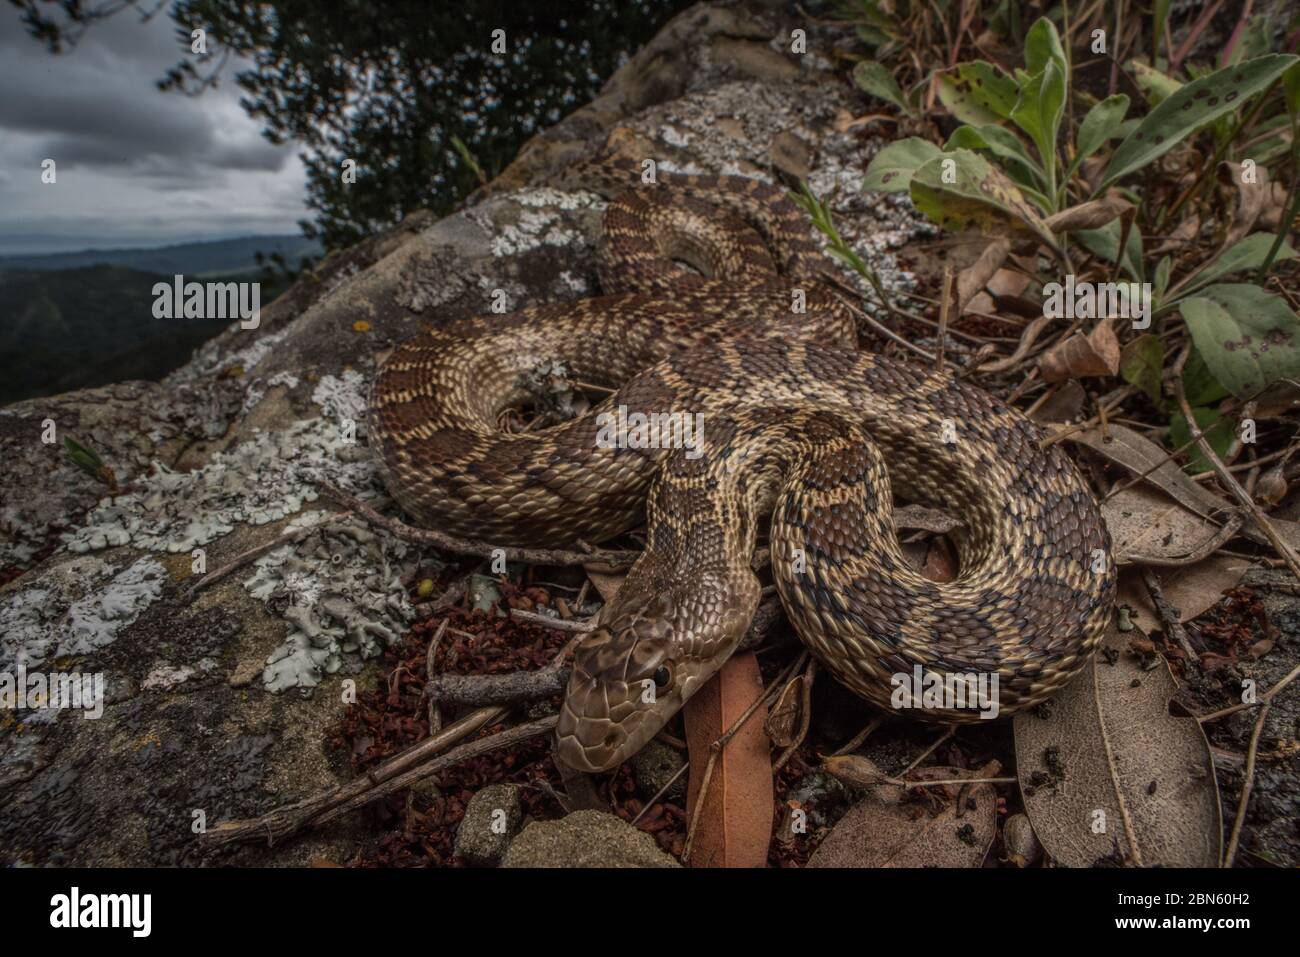 The most common snake in much of the west coast, a western gopher snake (Pituophis catenifer). Stock Photo